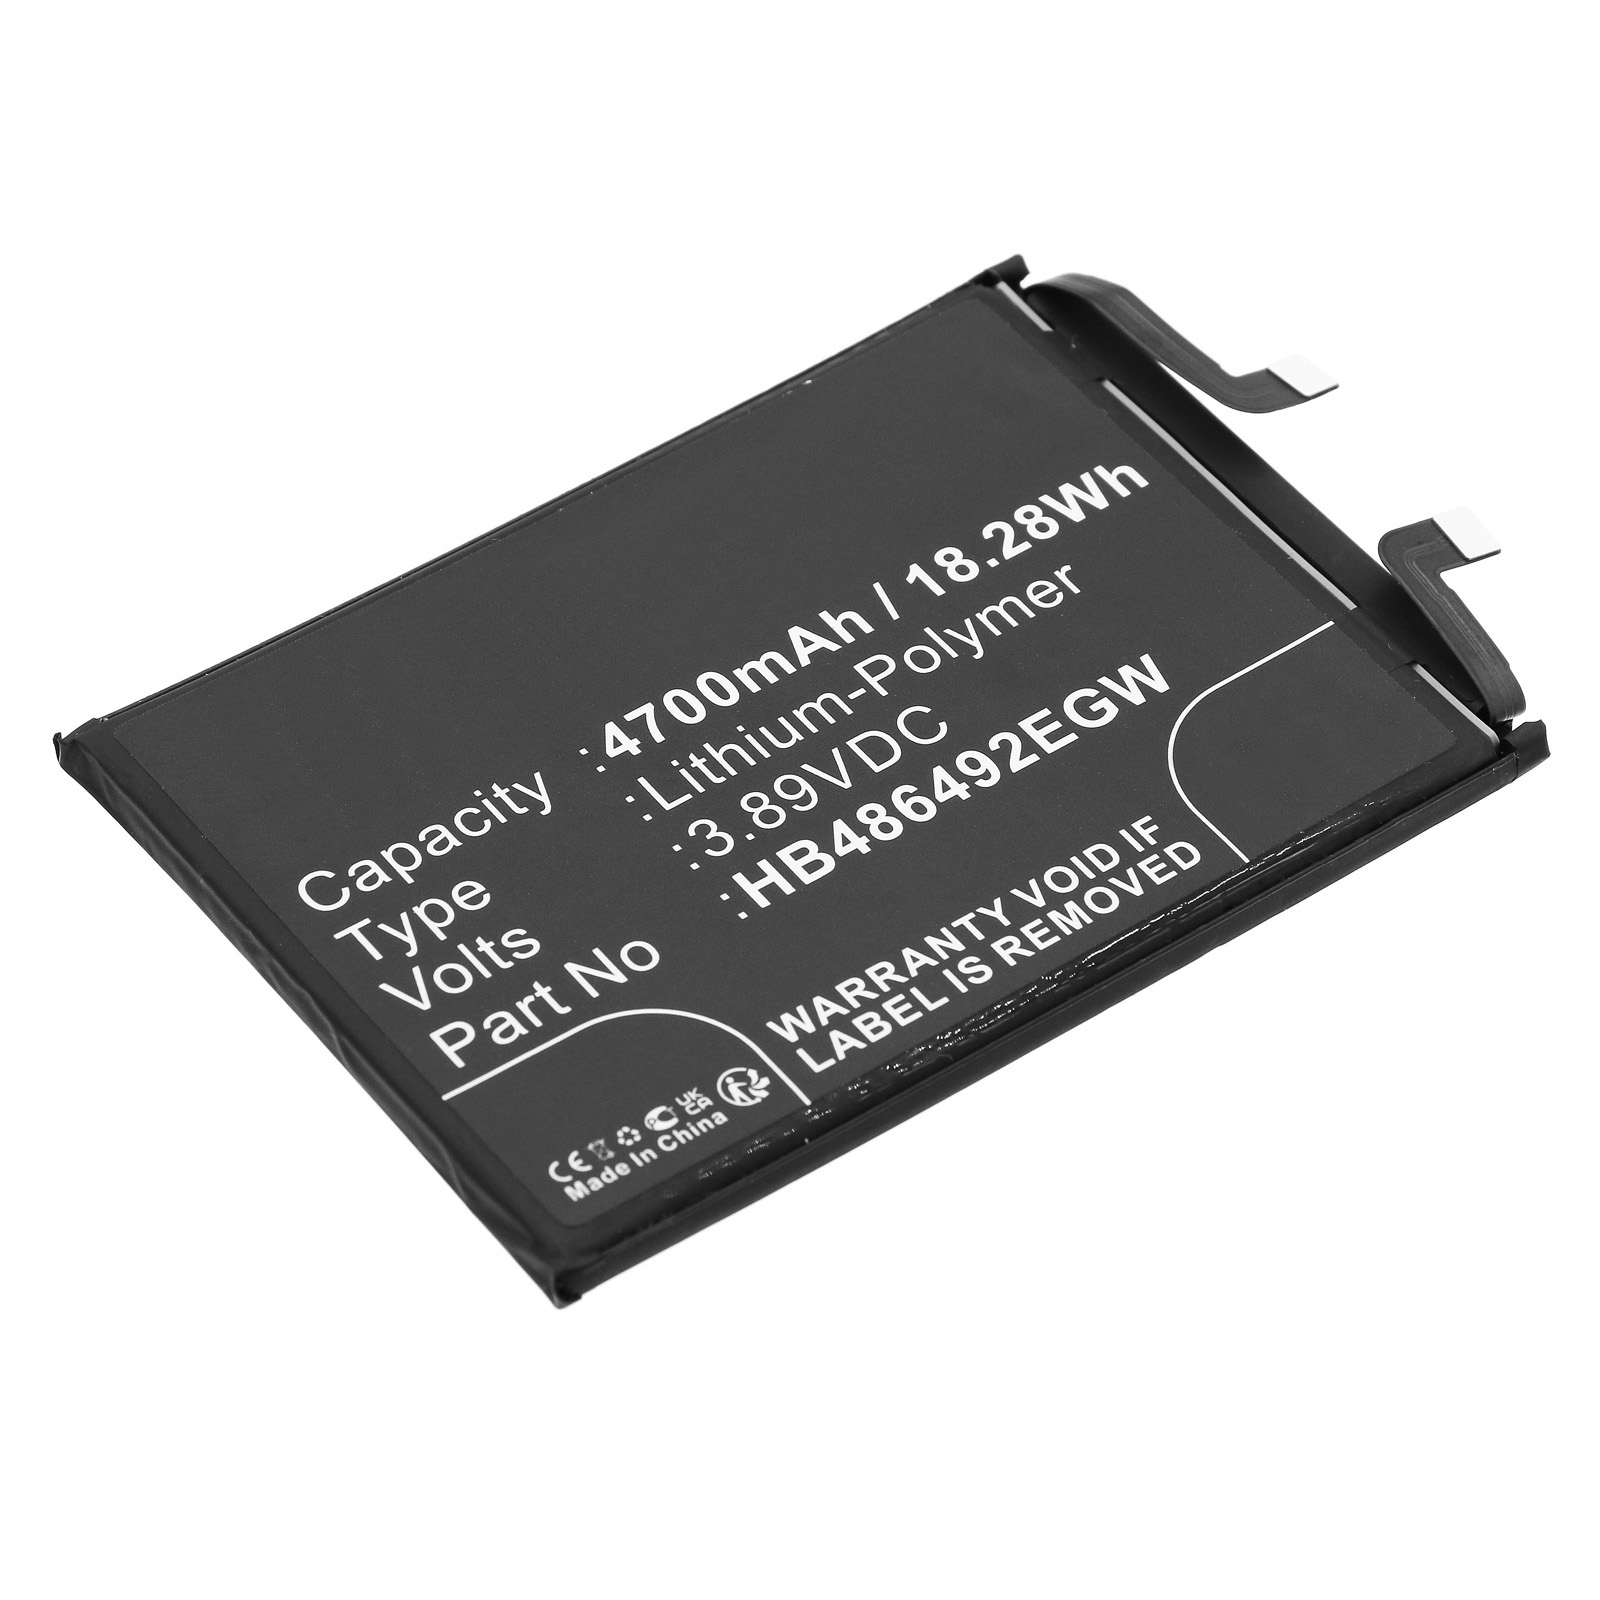 Synergy Digital Cell Phone Battery, Compatible with Honor HB486492EGW Cell Phone Battery (Li-Pol, 3.89V, 4700mAh)